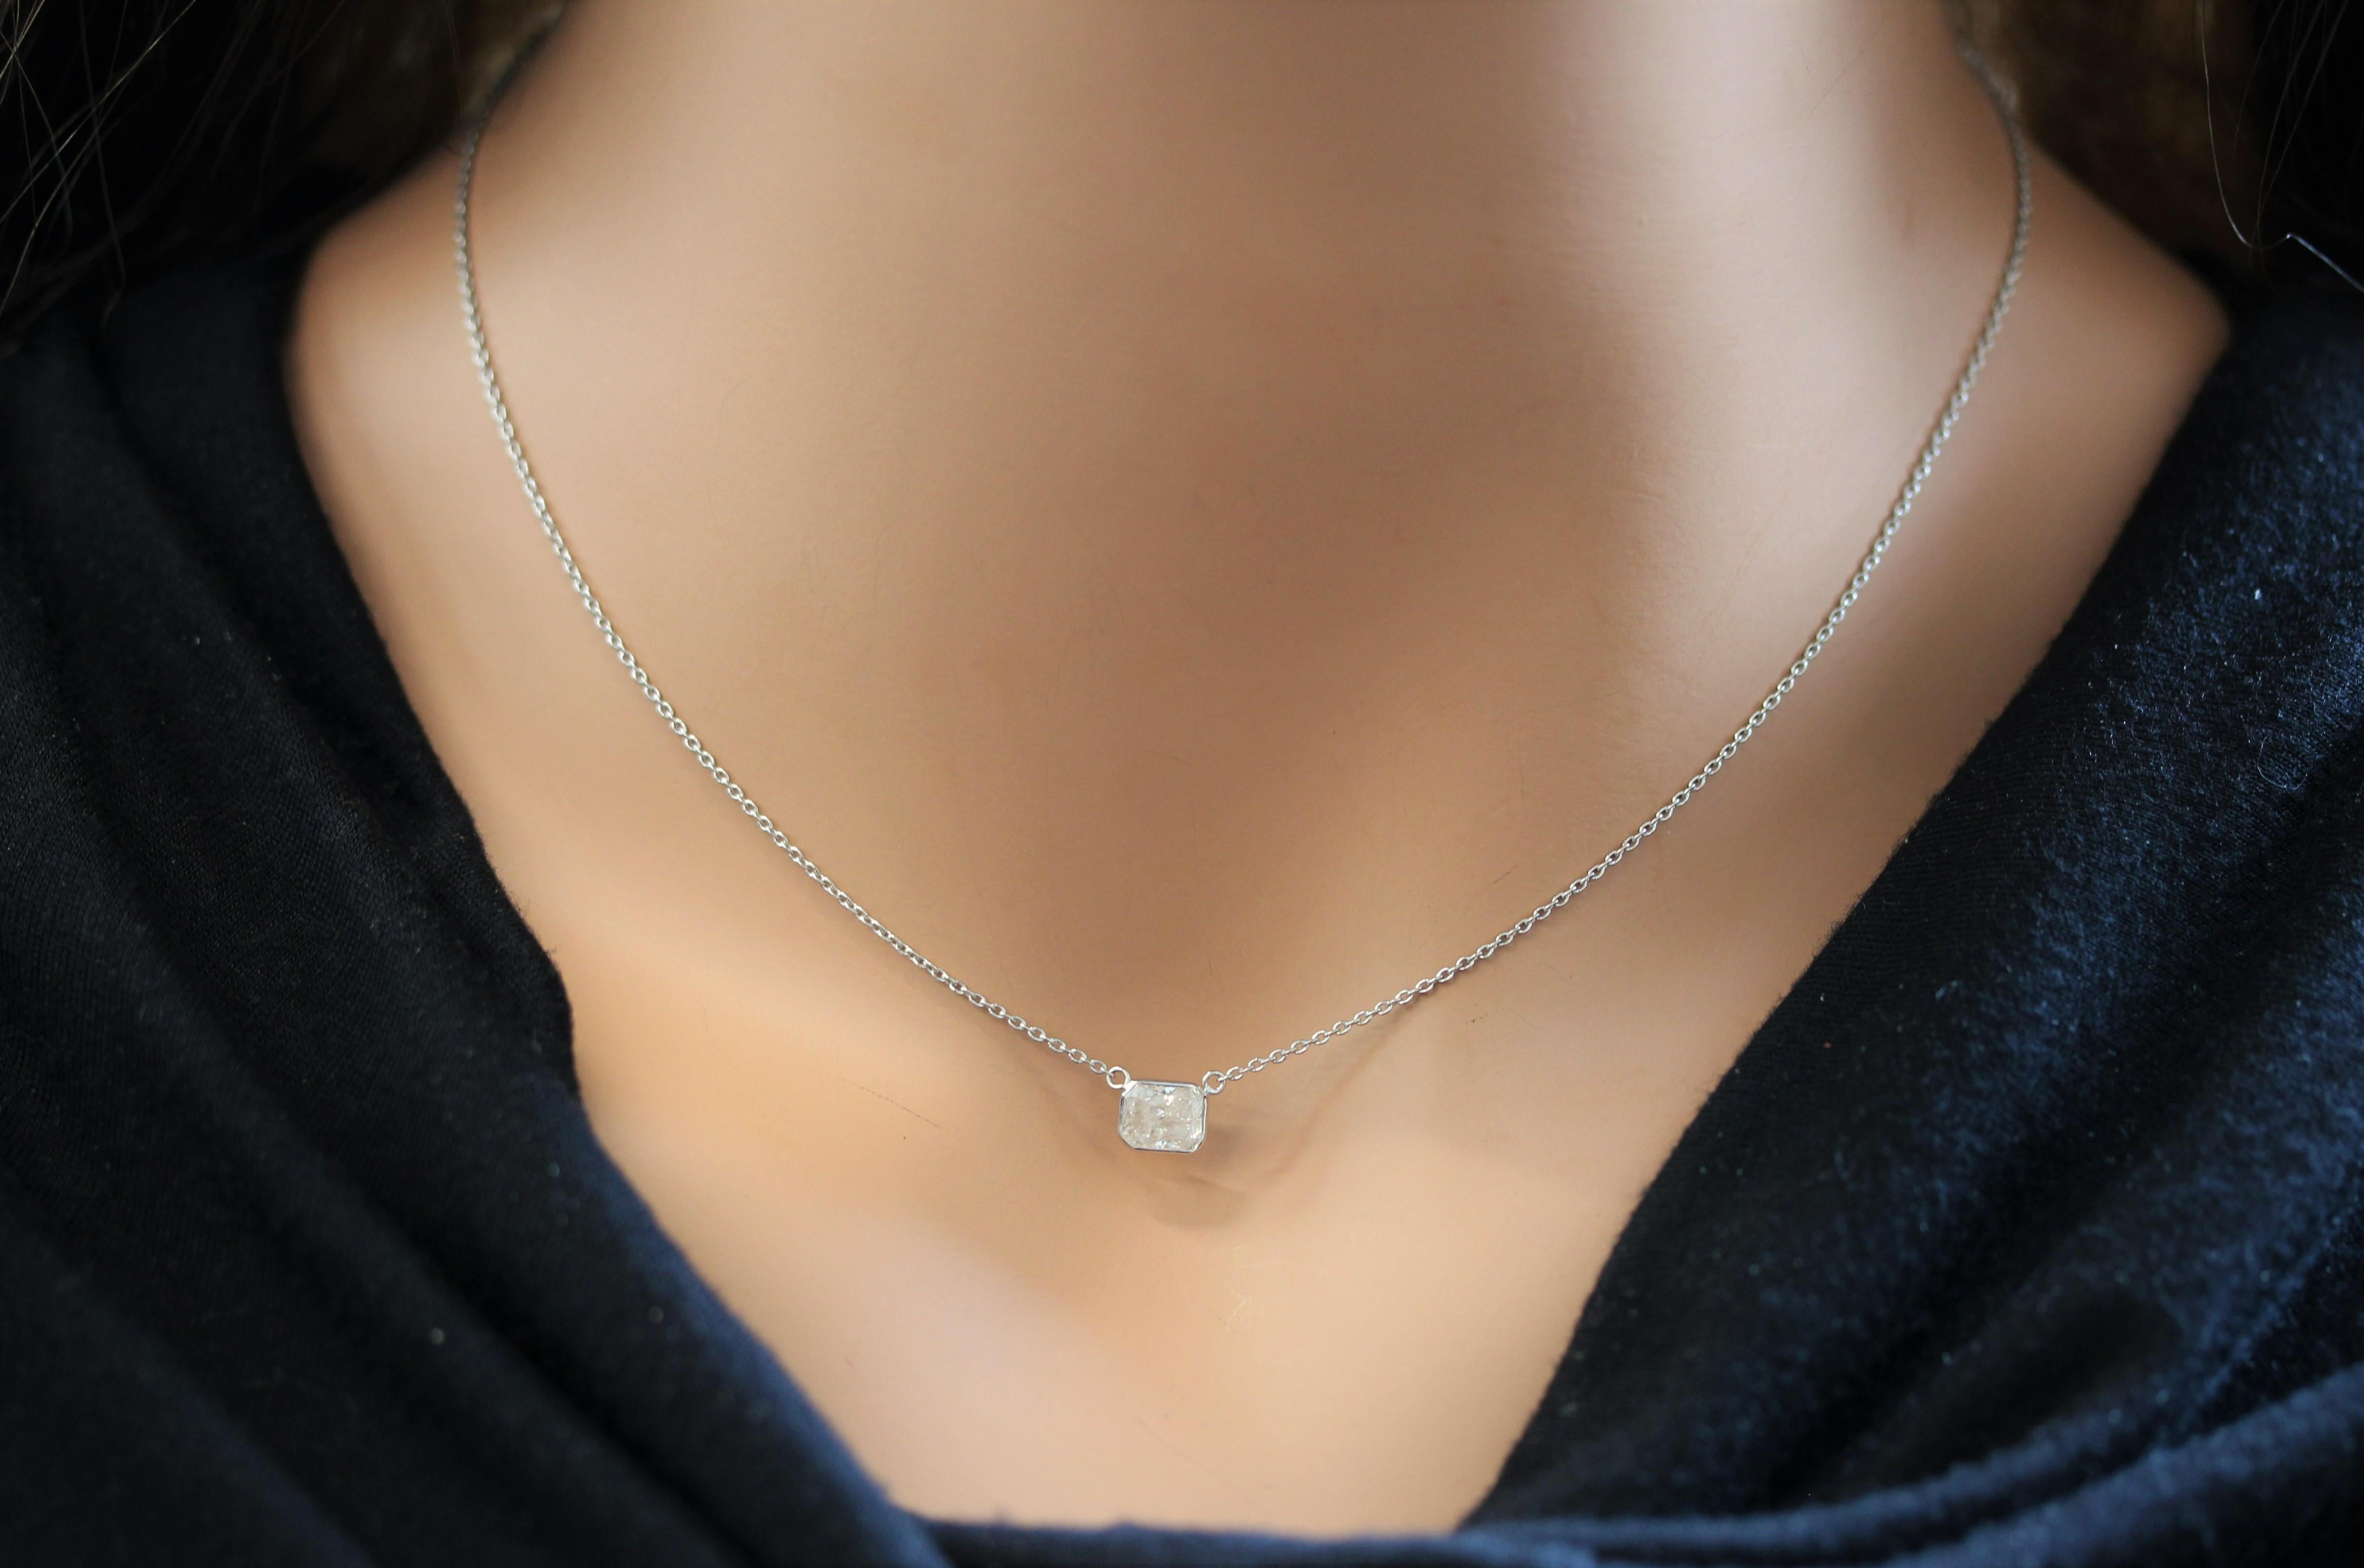 Radiant Cut 1.02 Carat Radiant Diamond Handmade Solitaire Necklace In 14k White Gold For Sale